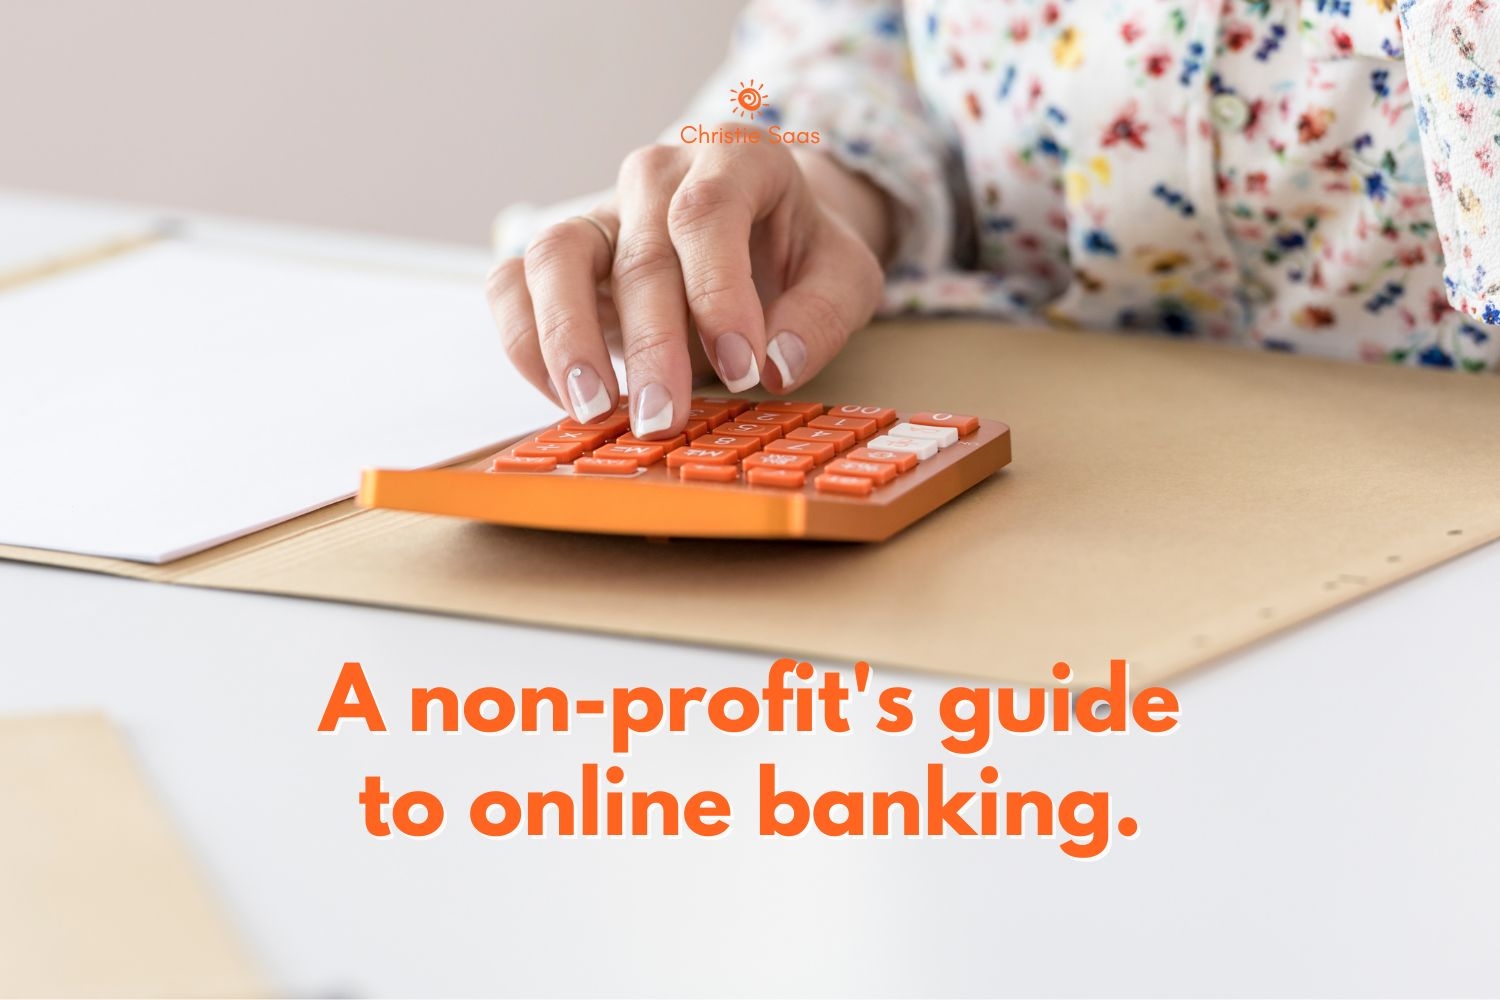 A non-profit's guide to online banking